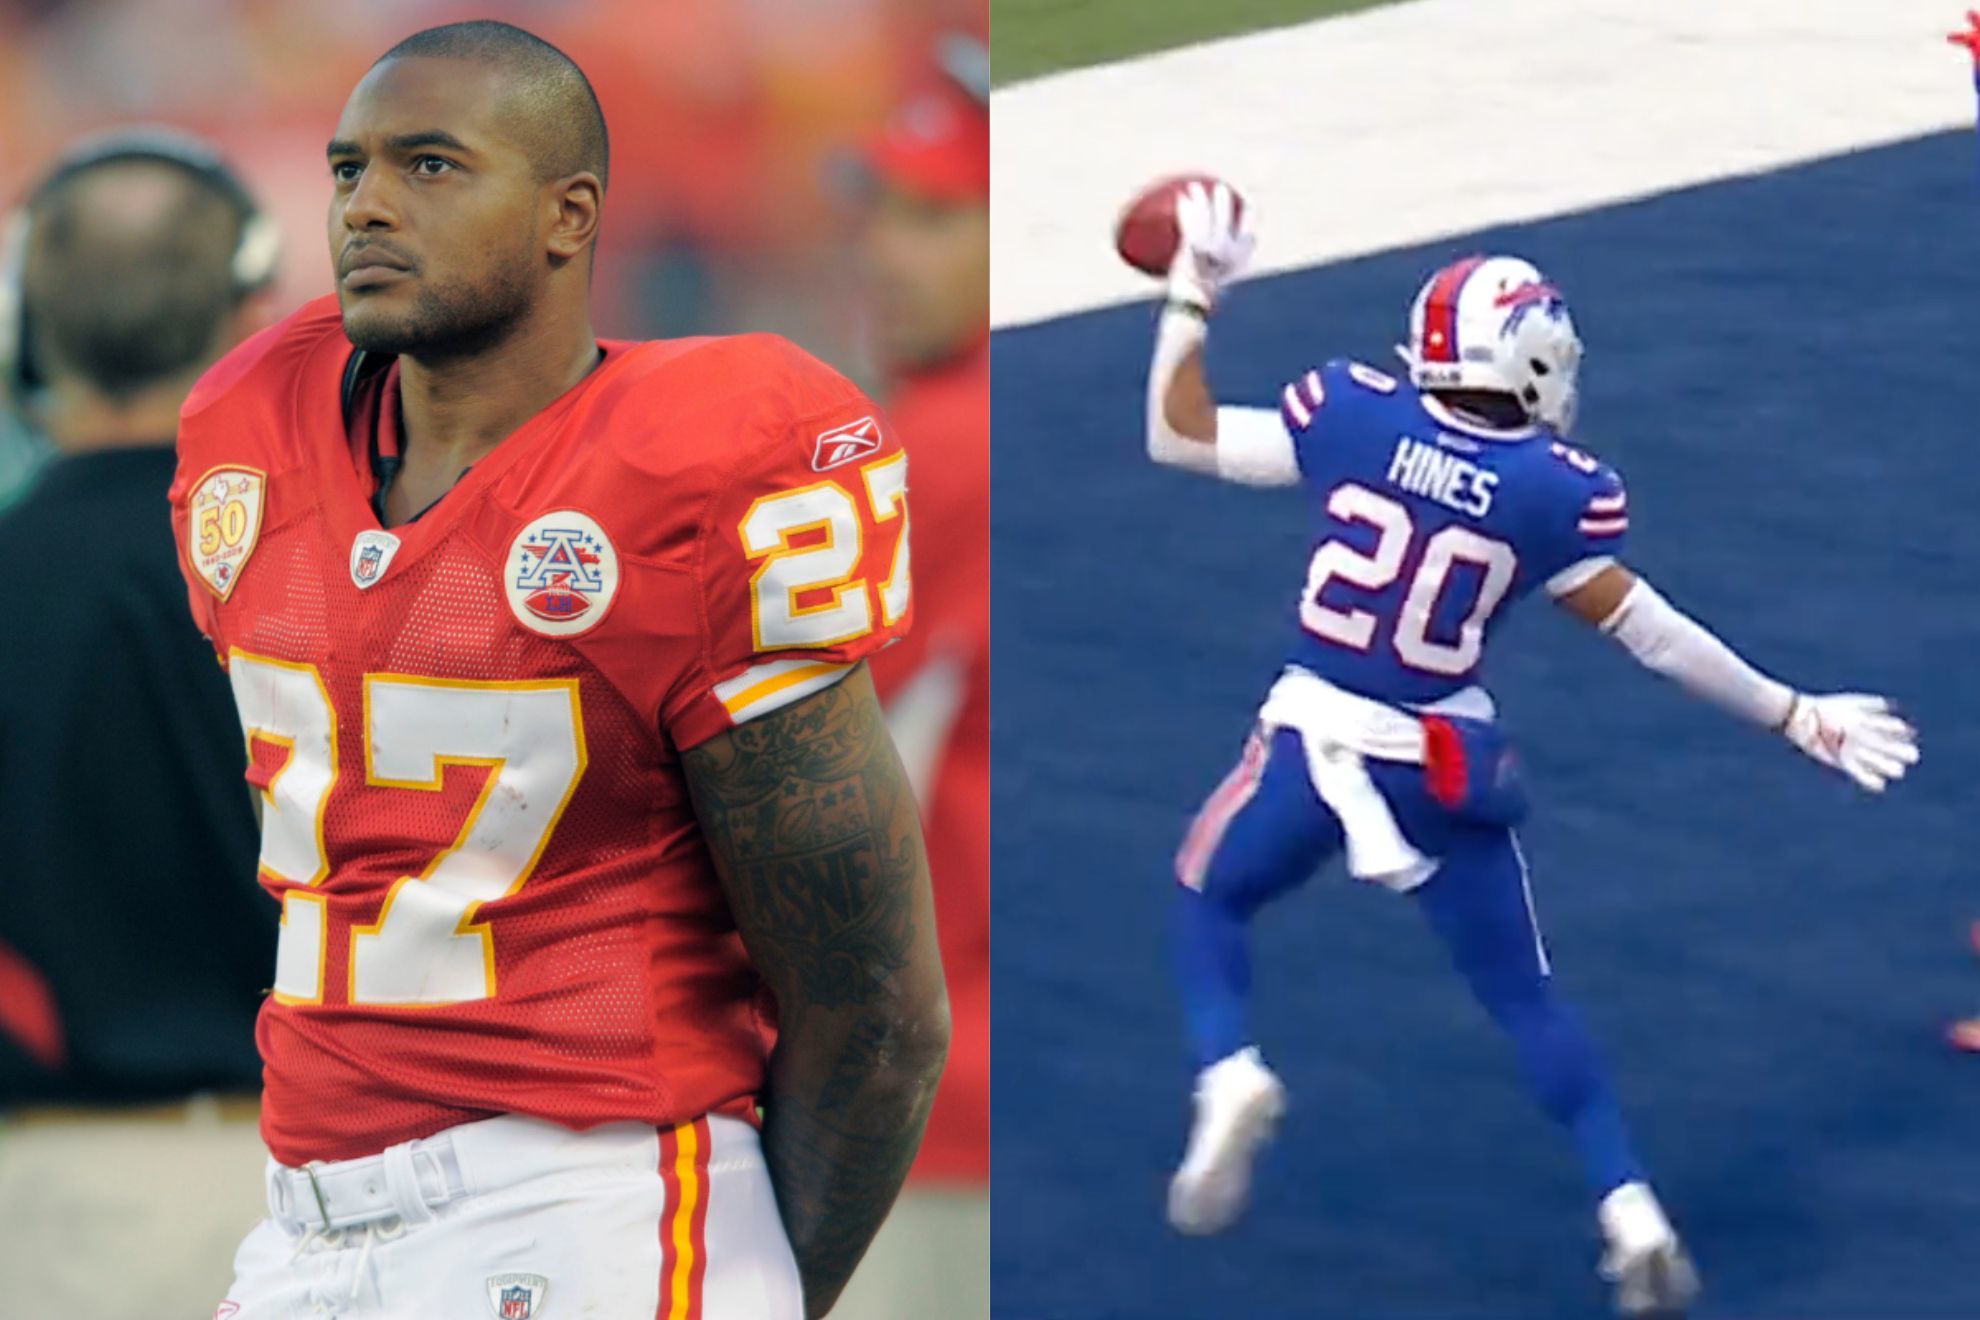 Larry Johnson (left) during his time with the Kansas City Chiefs. (Right) Nyheim Hines celebrates one of his 2 TDSs from Week 18.